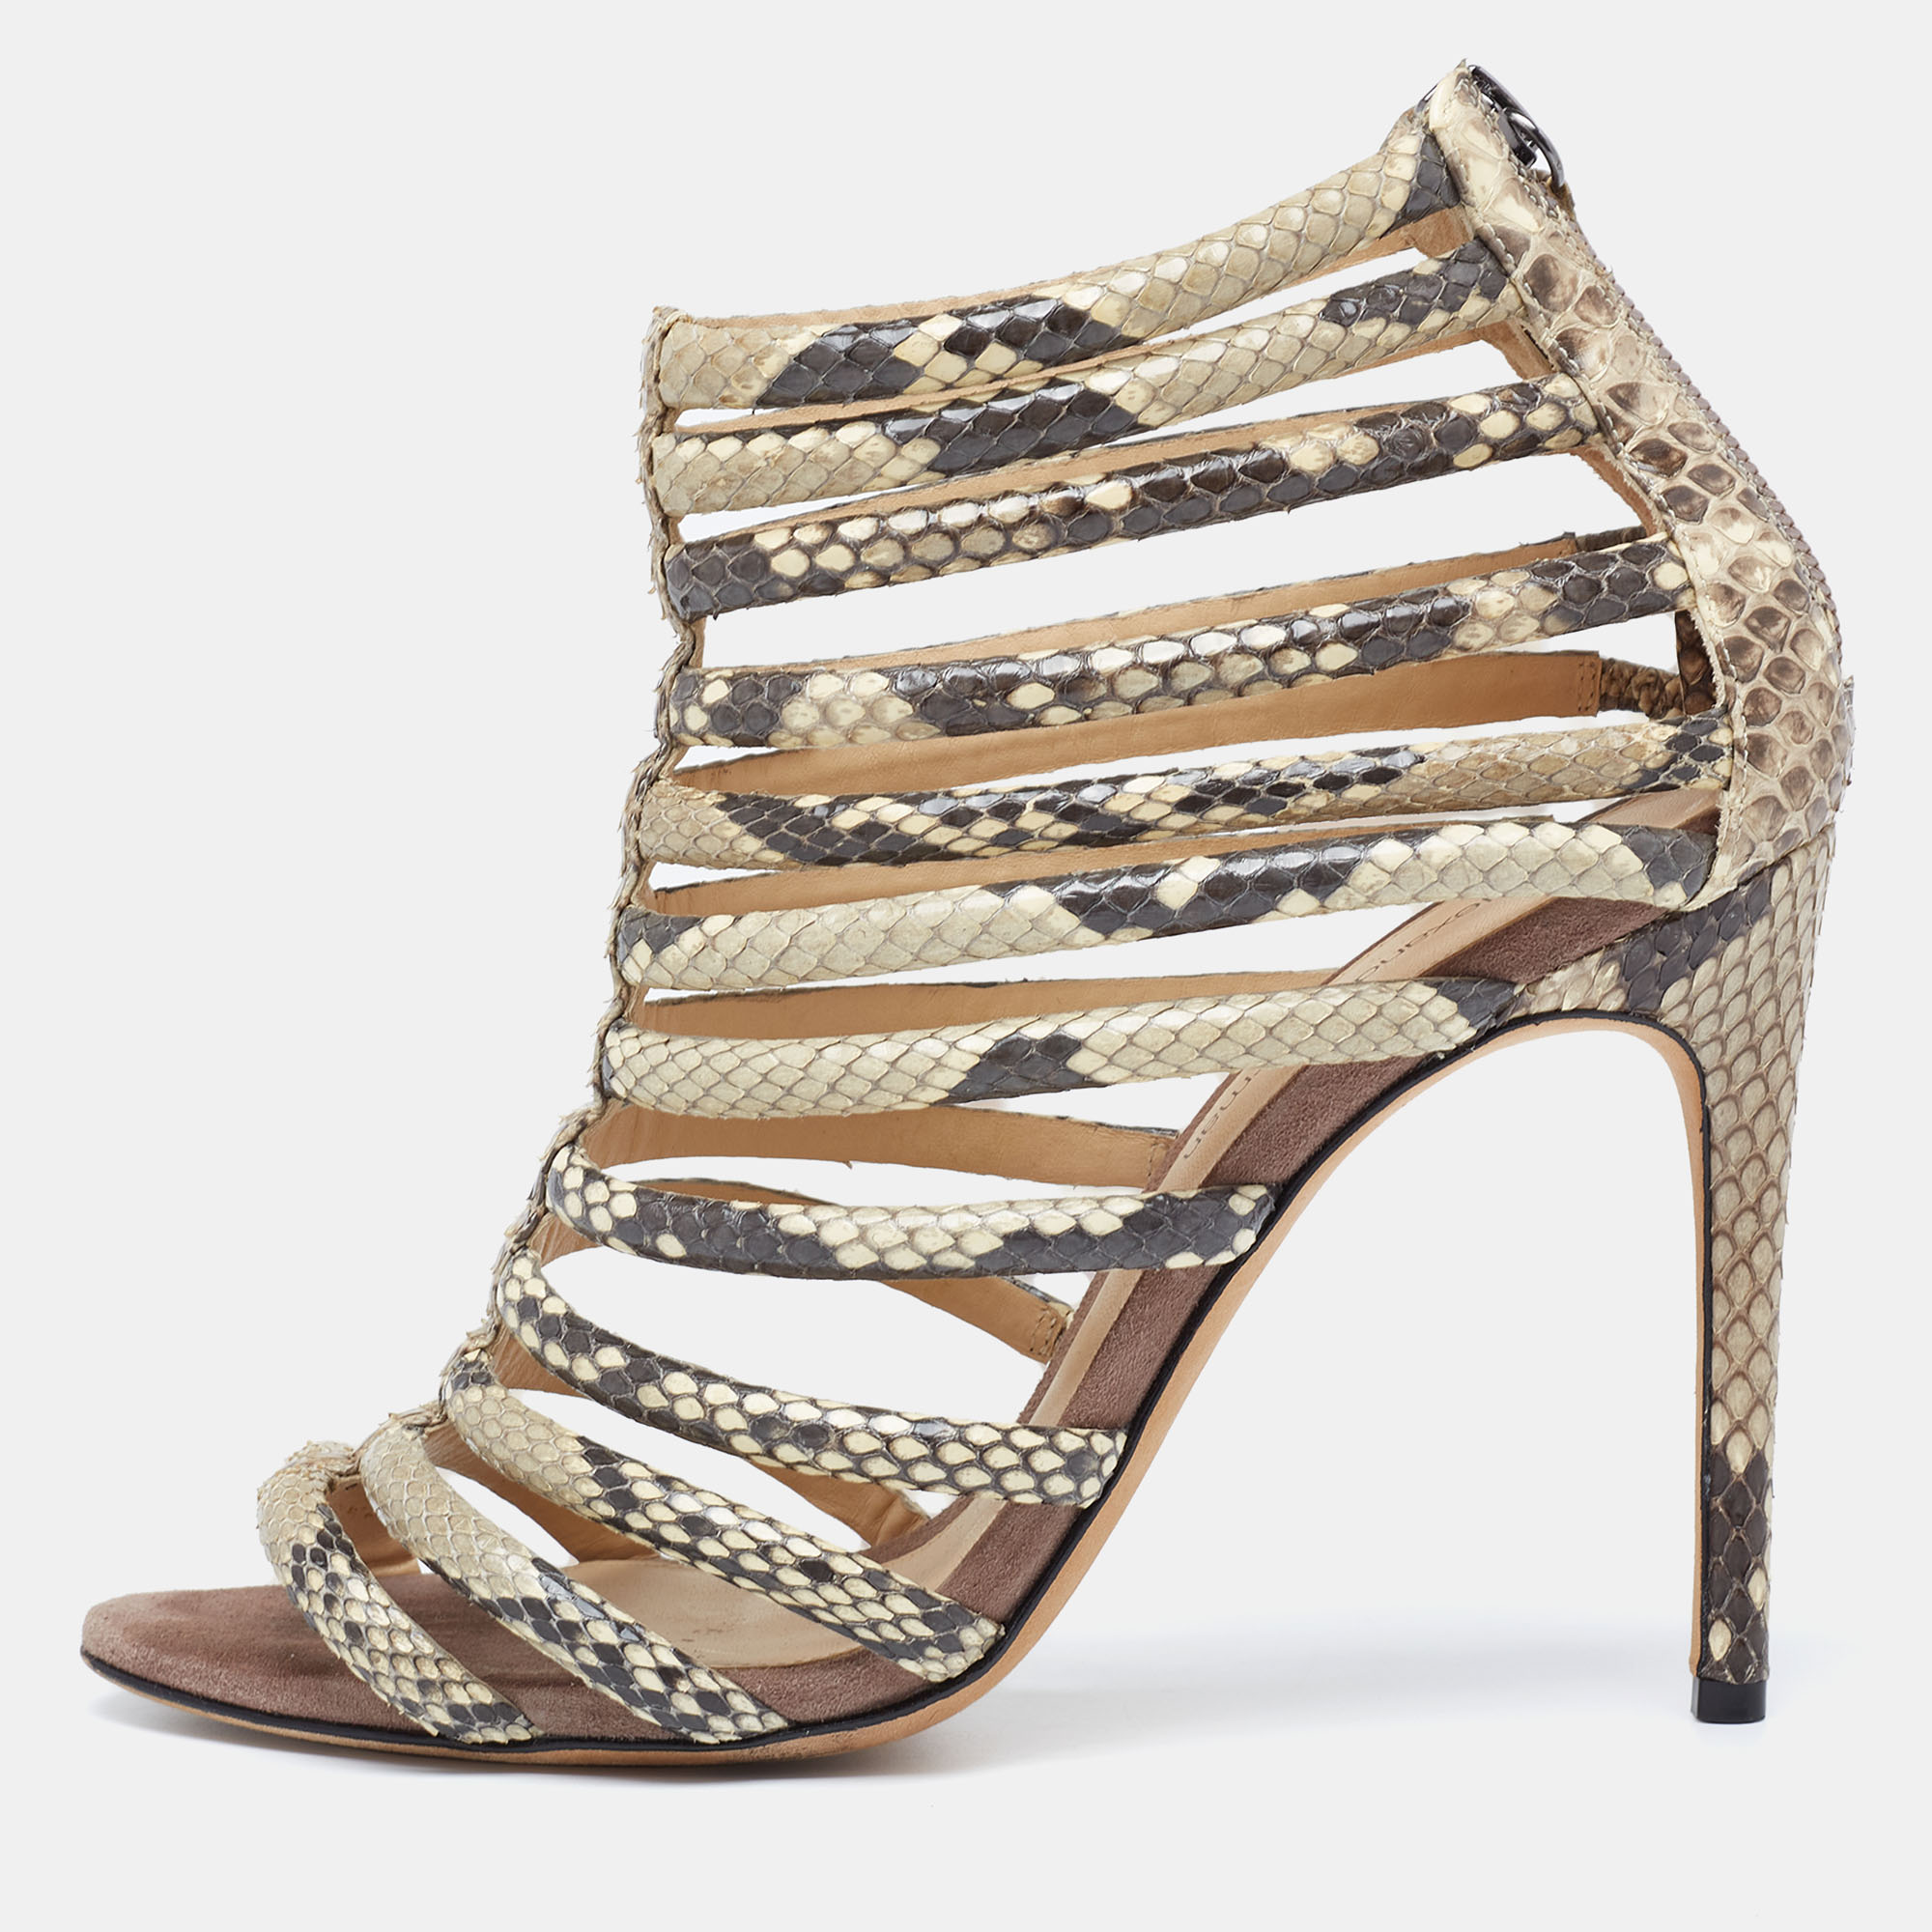 Pre-owned Alexandre Birman Brown/beige Python Embossed Leather Caged Zipper Sandals Size 37